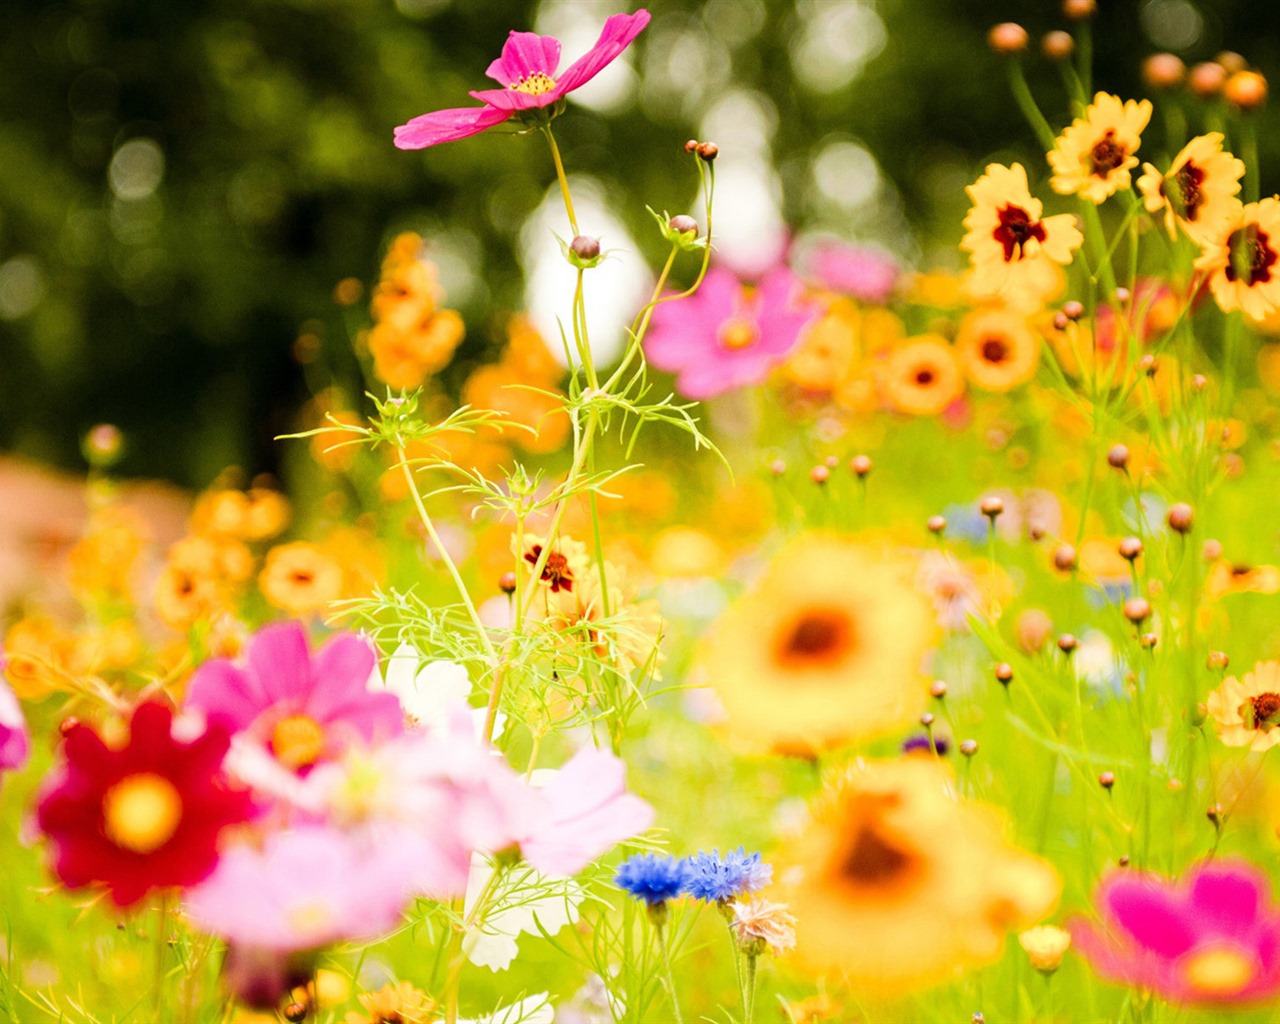 Fresh flowers and plants spring theme wallpapers #6 - 1280x1024